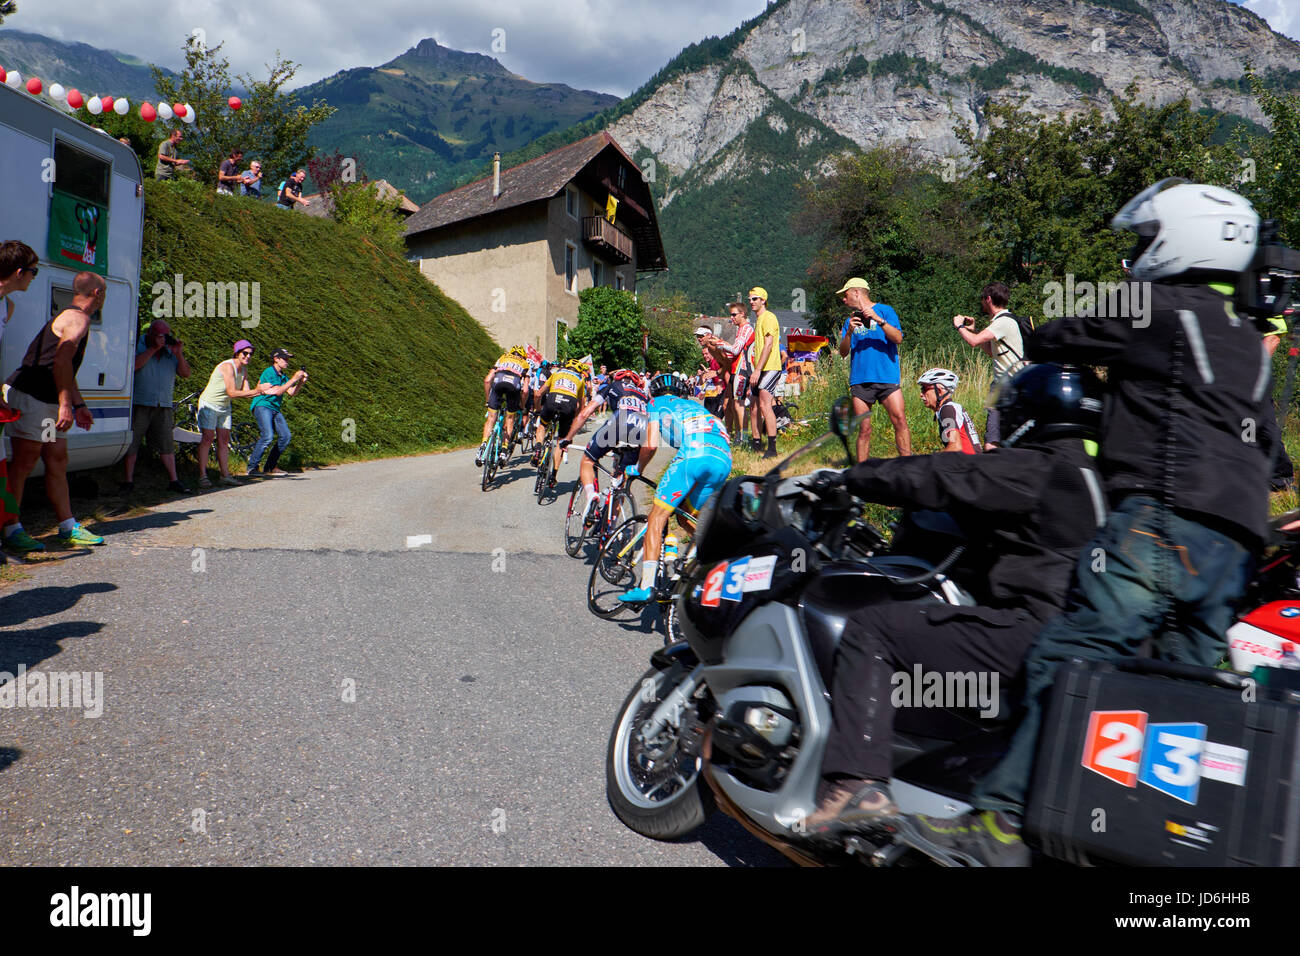 MONTVERNIER, FRANCE - JULY 23, 2015: Camera crew on motorcycle, behind bicycle riders who are climbing a mountain in the Tour de France Stock Photo